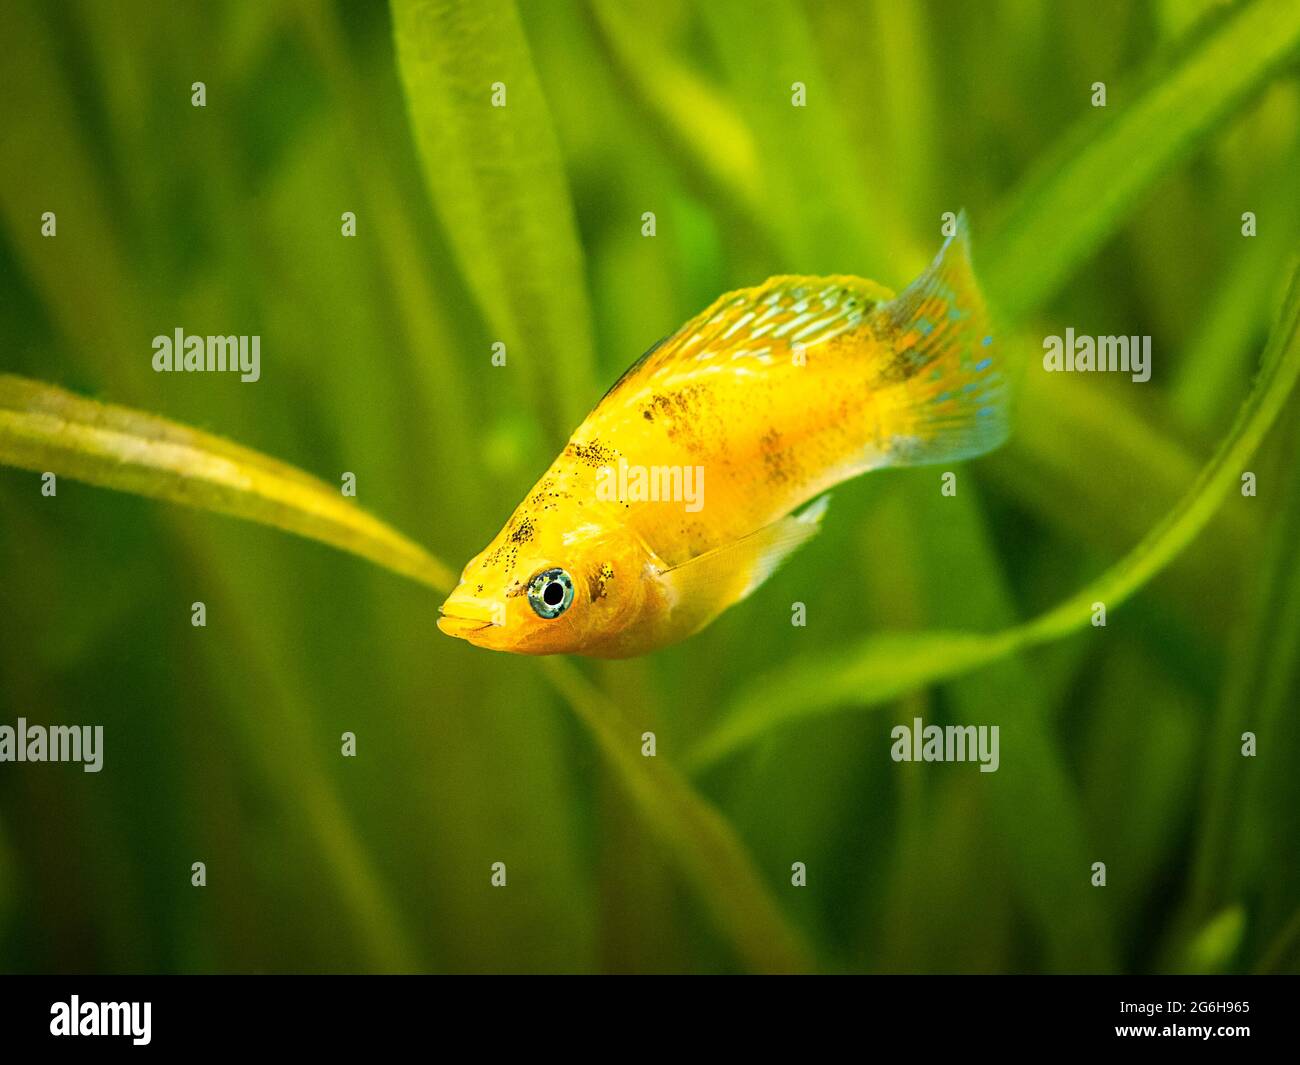 balloon molly (Poecilia latipinna) isolated in a fish tank with blurred background Stock Photo